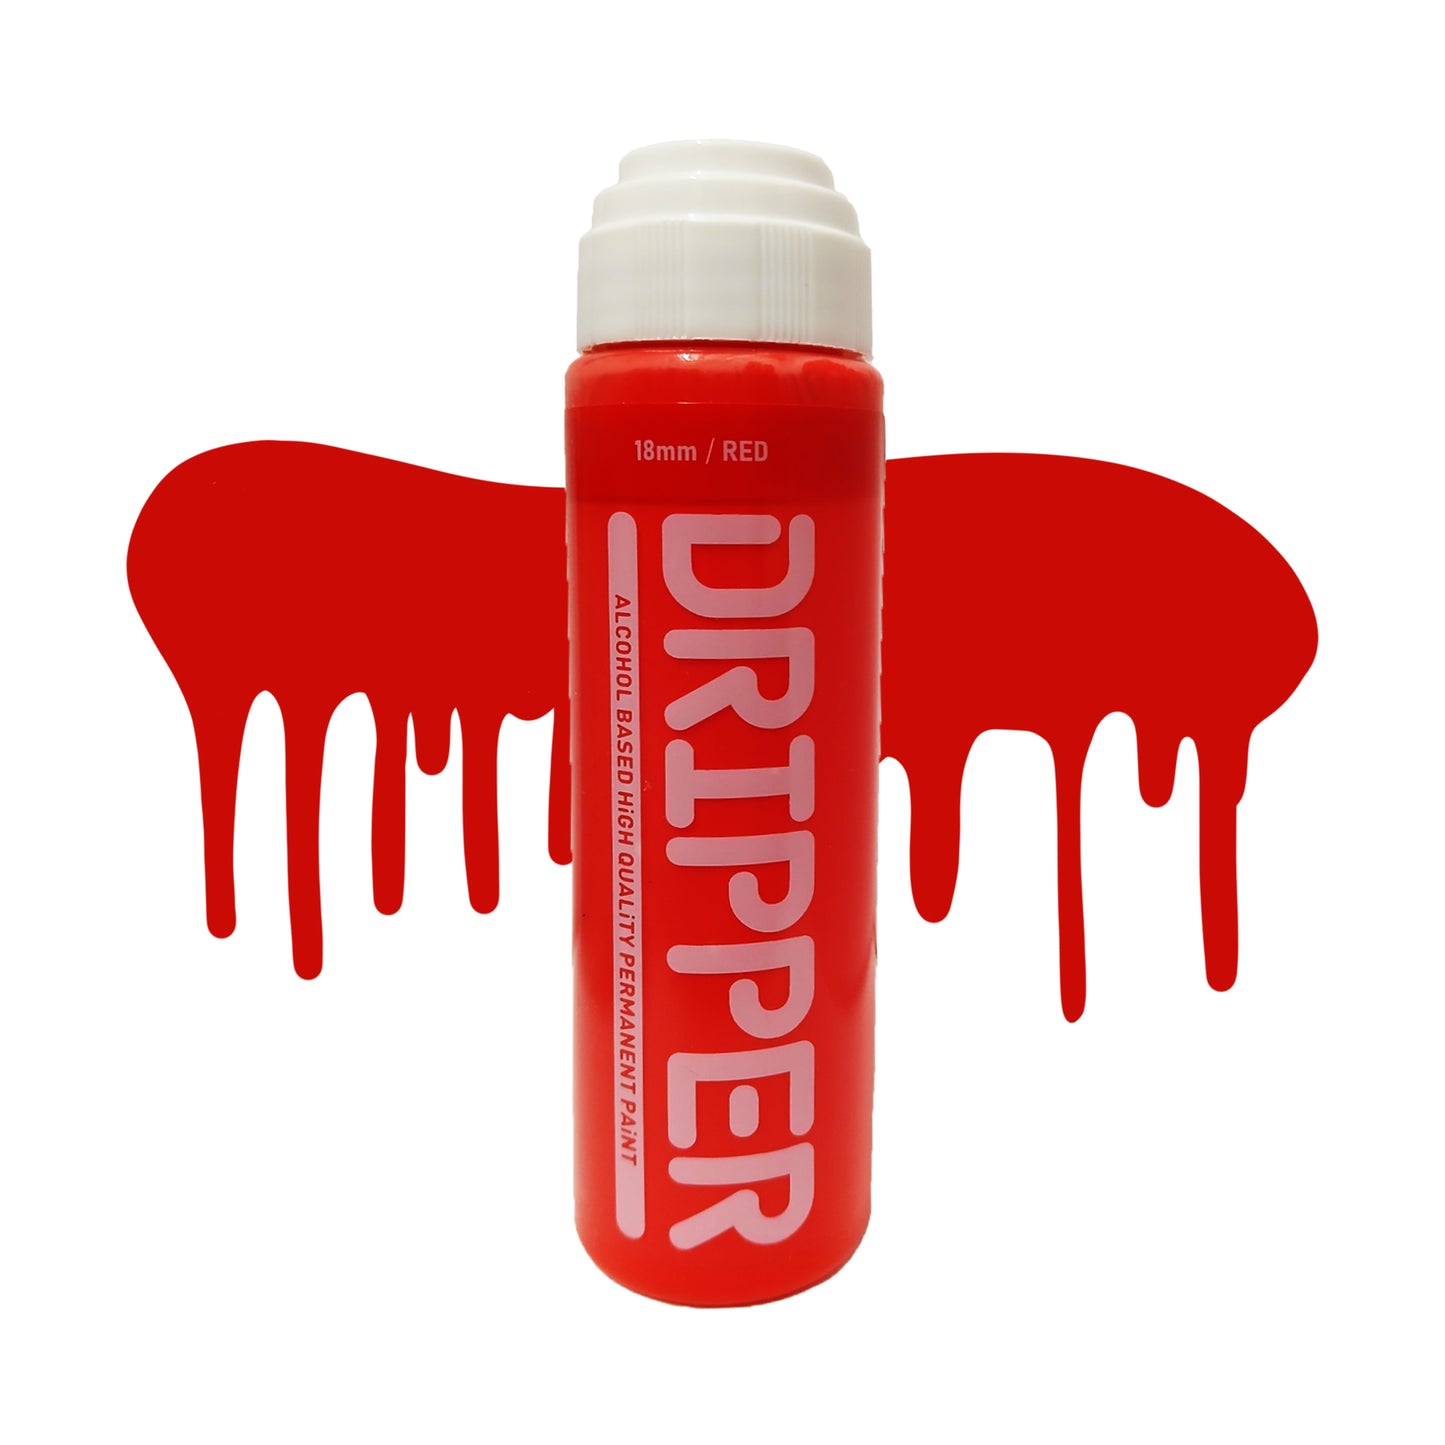 Dope Paint, Graffiti Squeeze Dripper Mop Marker in red.